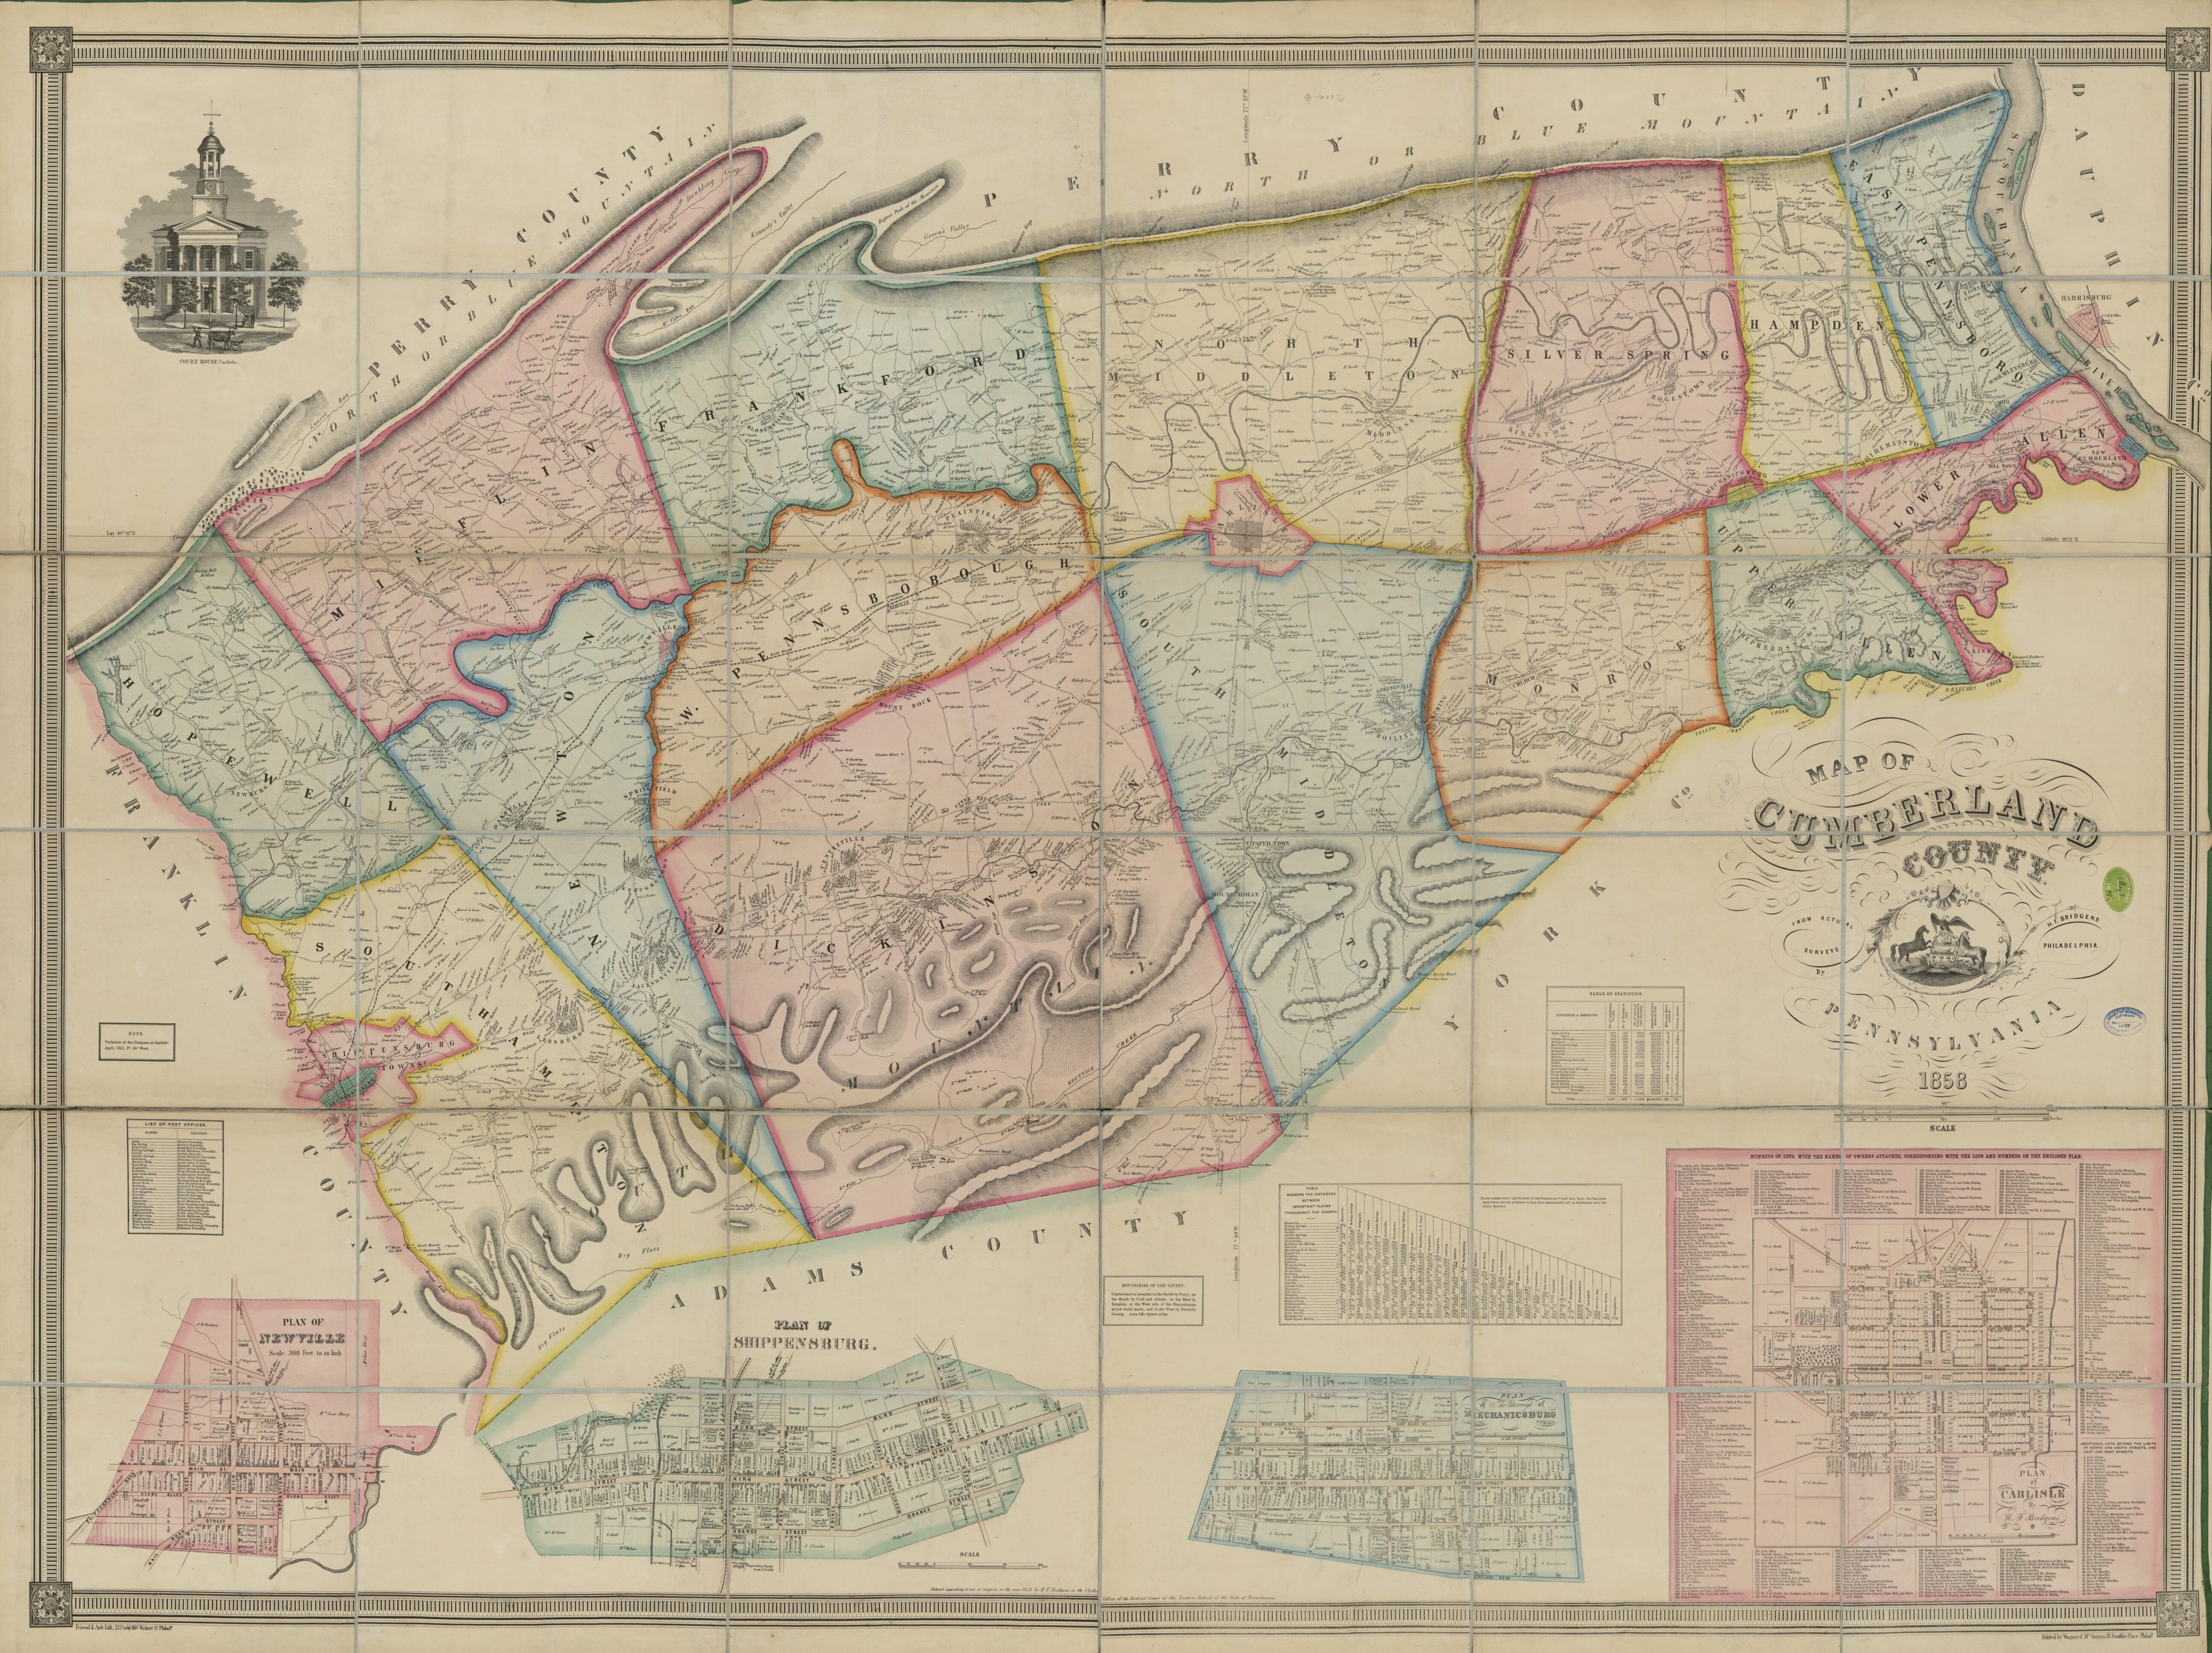 This old map of Map of Cumberland County, Pennsylvania : from Actual Surveys from 1858 was created by H. F. (Henry F.) Bridgens,  Friend &amp; Aub,  Wagner &amp; M&